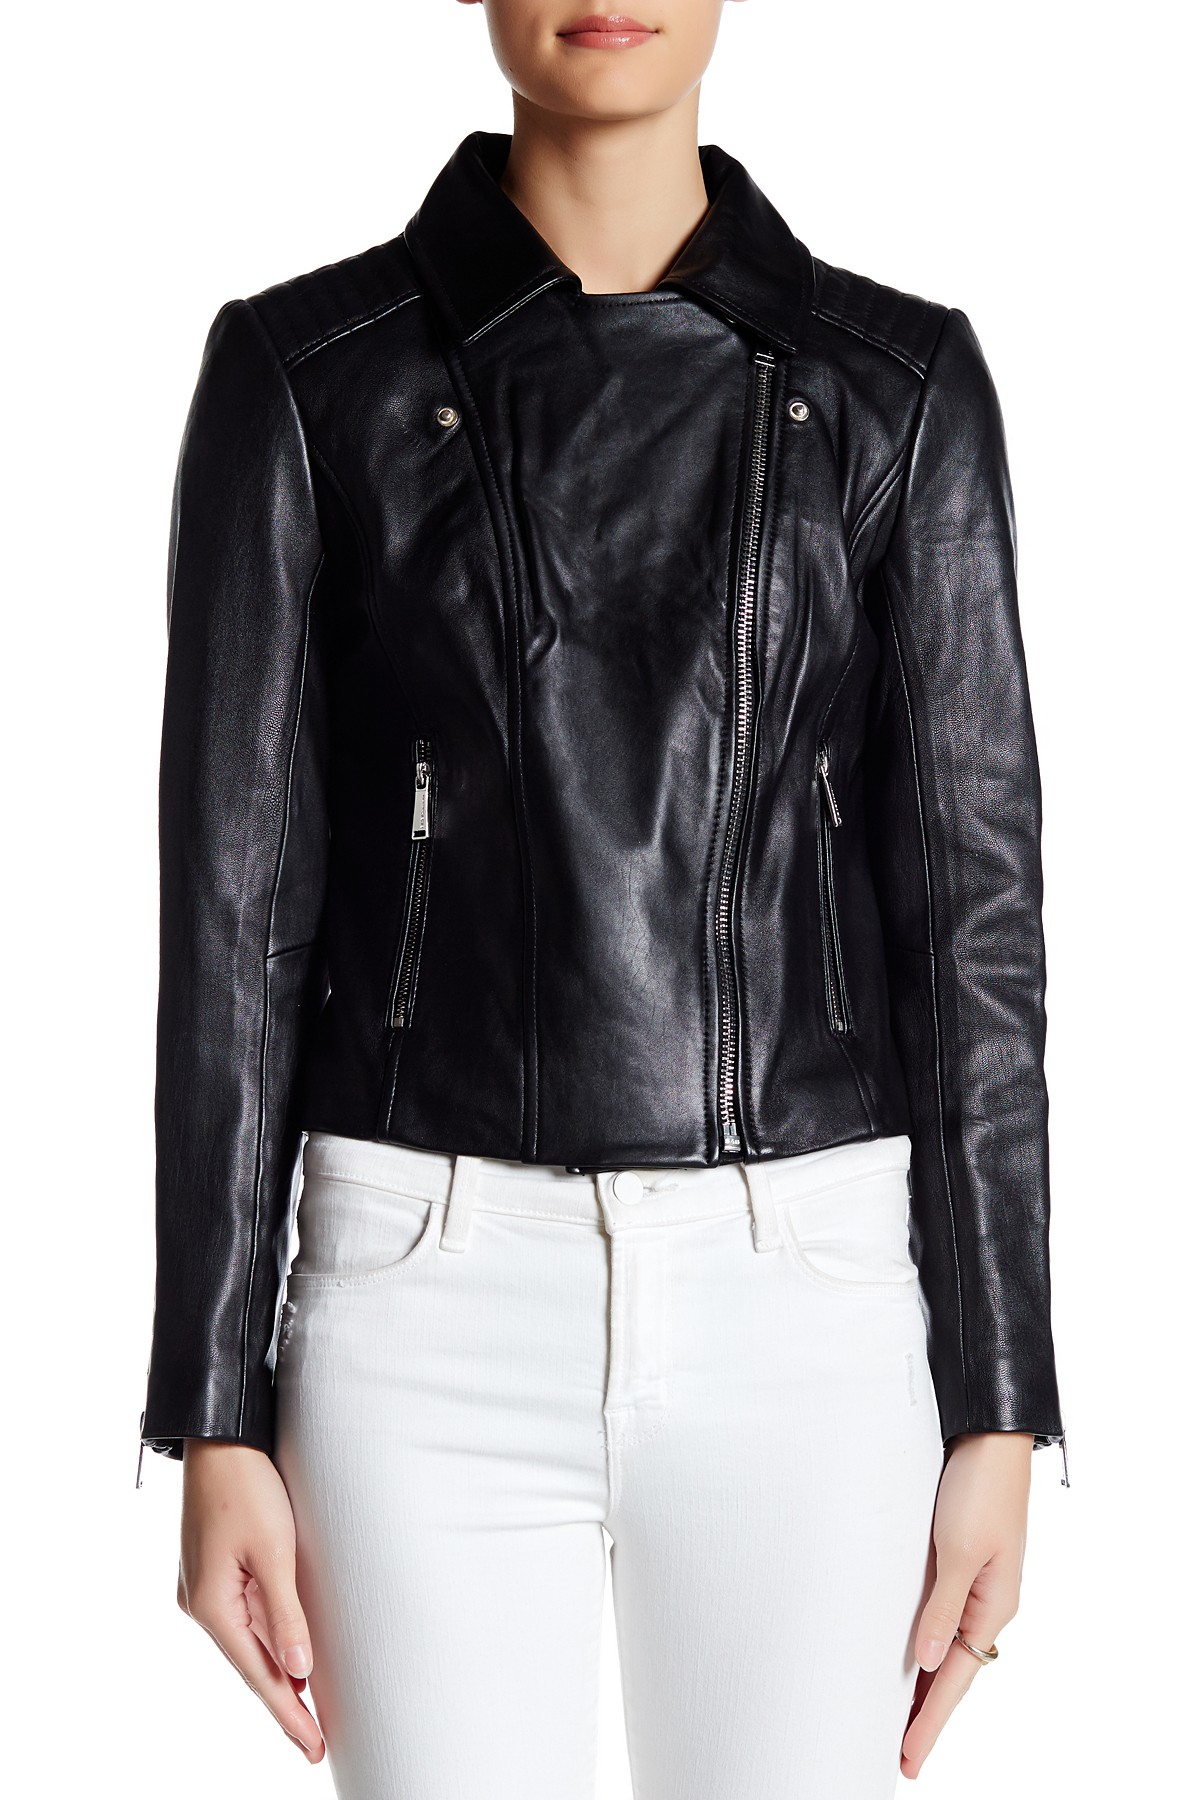 BCBGeneration Classic Leather Moto Jacket in Black - Lyst